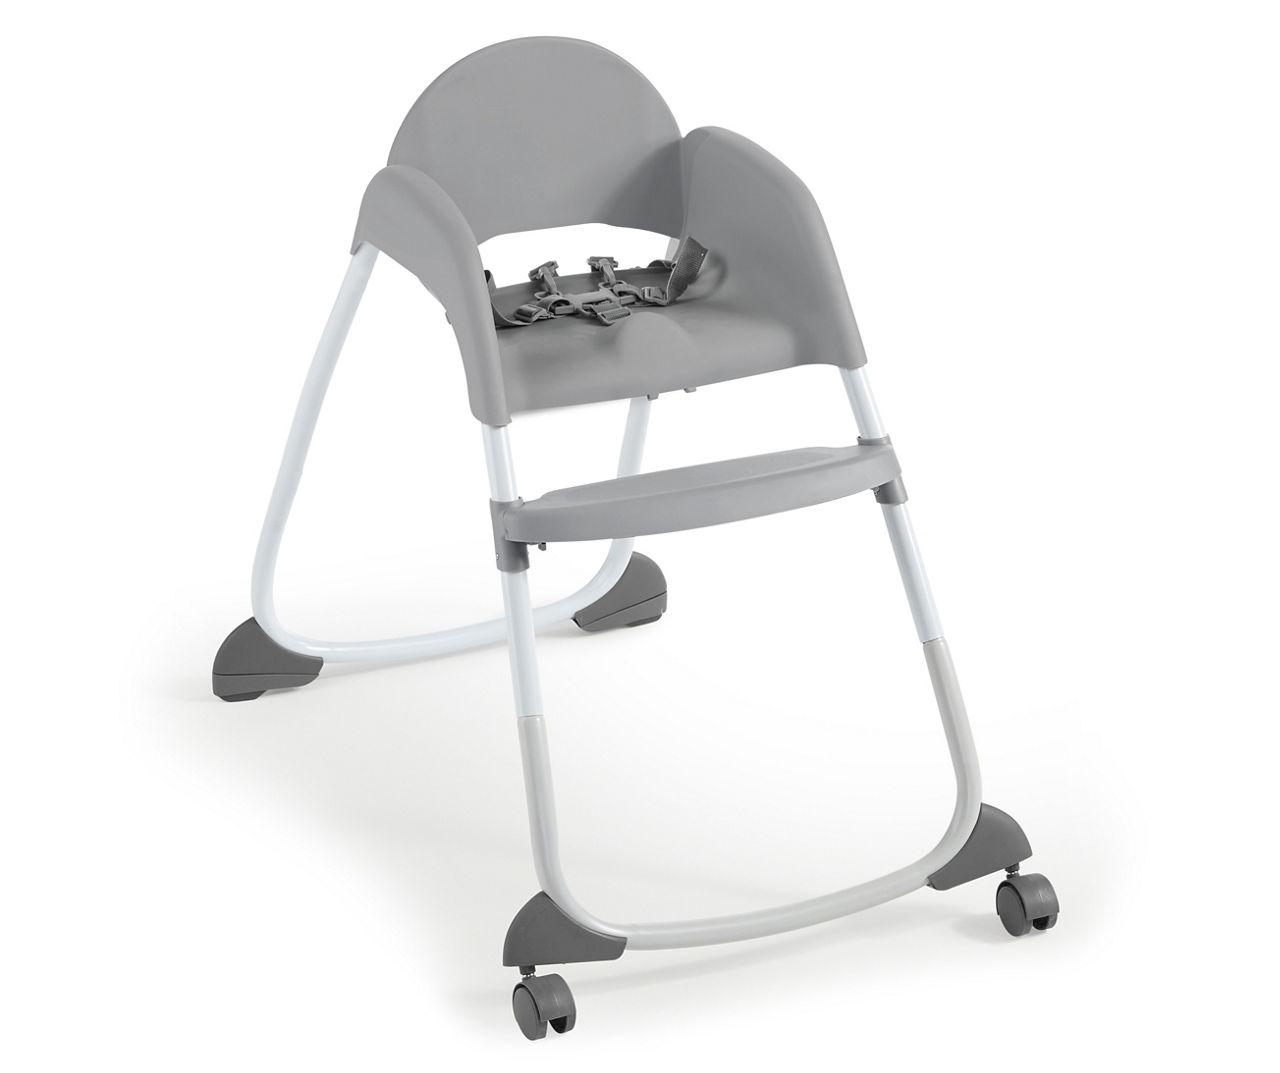 Ingenuity Trio 3-in-1 Convertible High Chair, Toddler Chair, Booster Seat -  Flora The Unicorn 